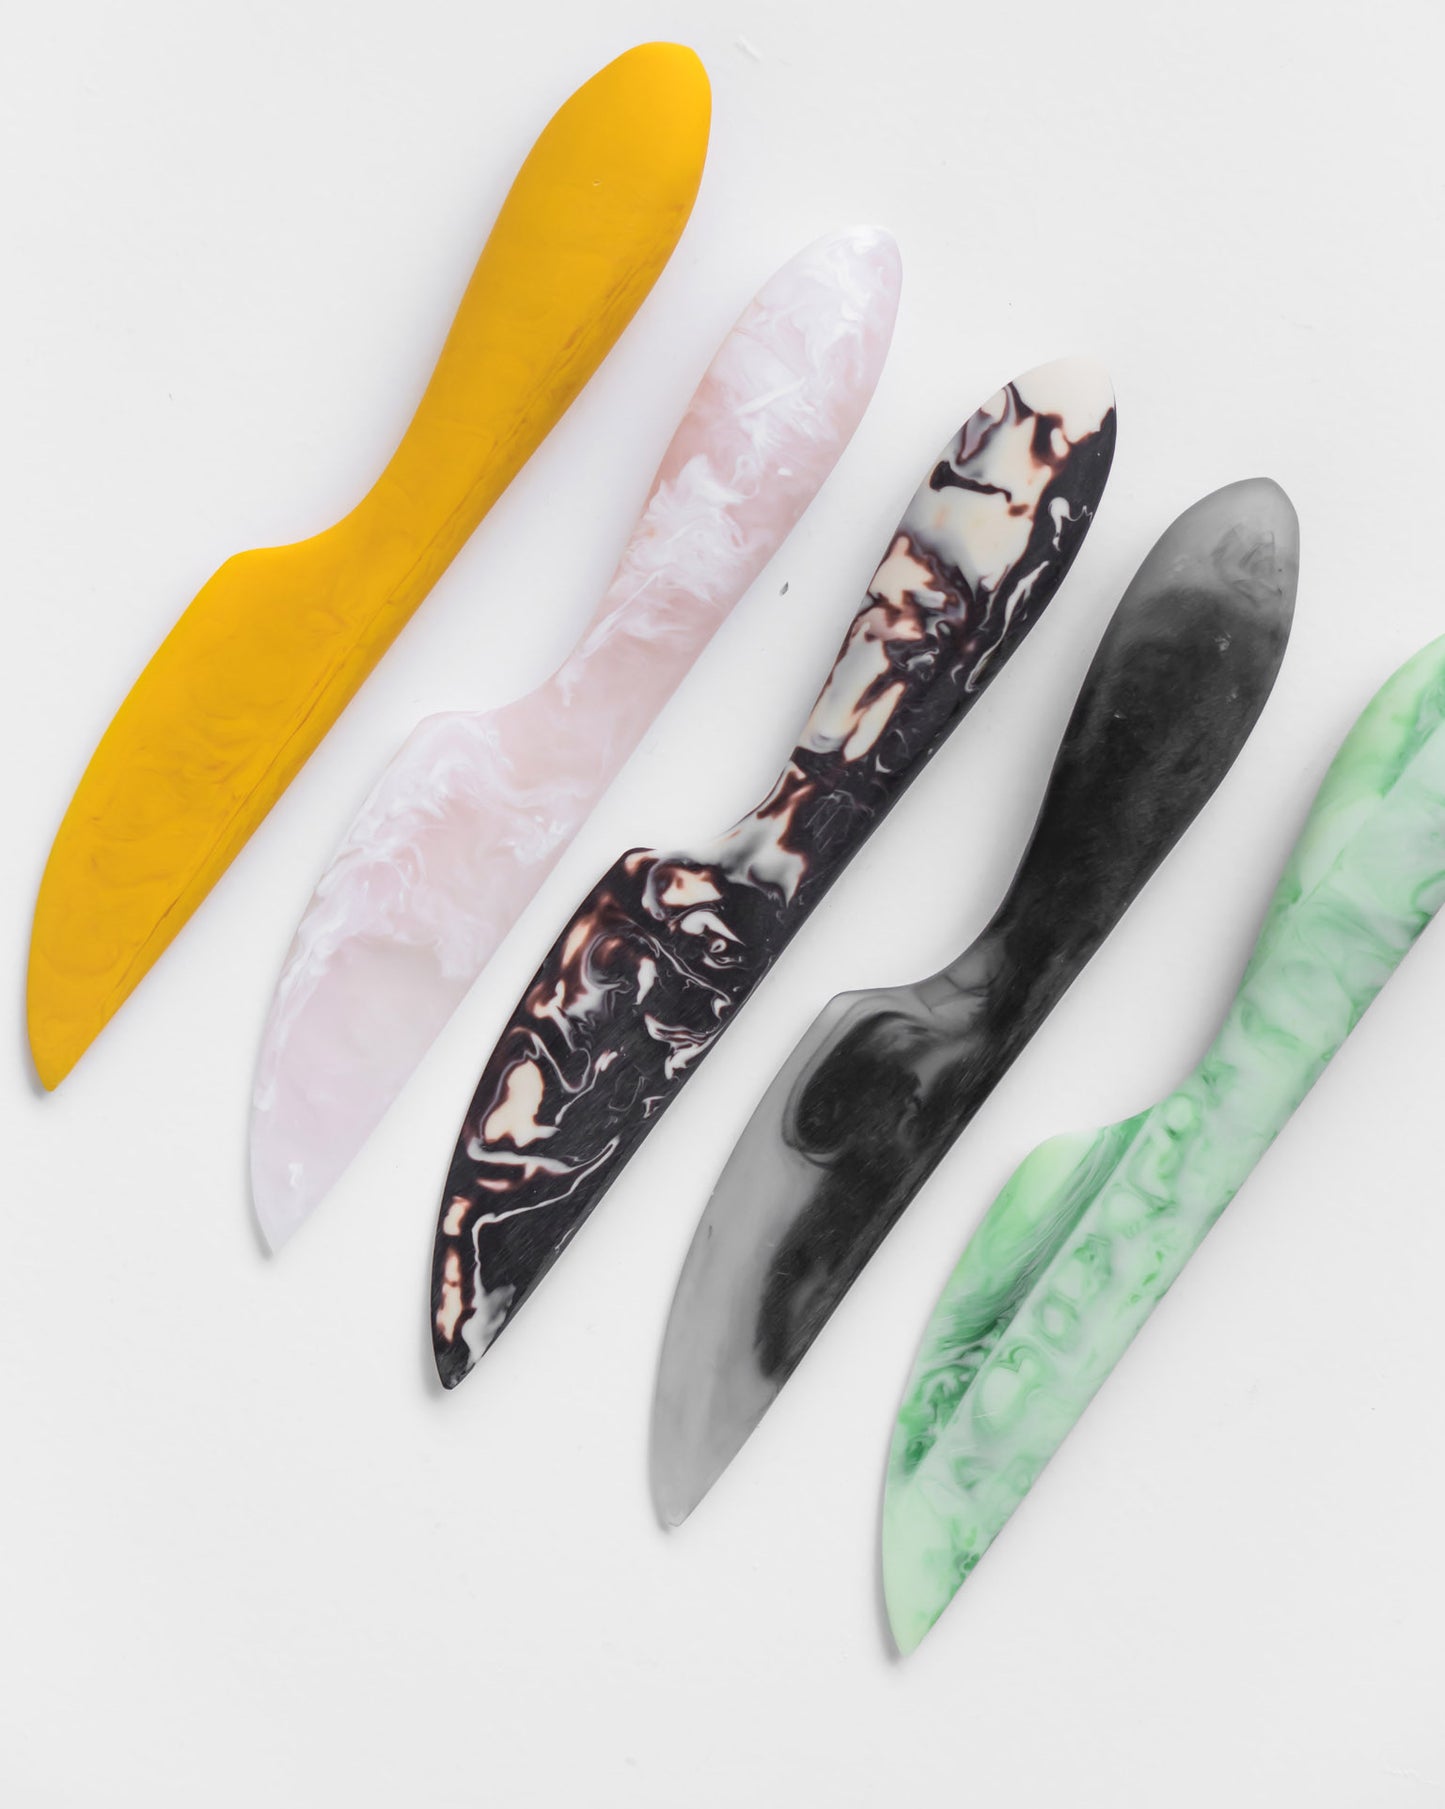 RESIN CHEESE KNIFE